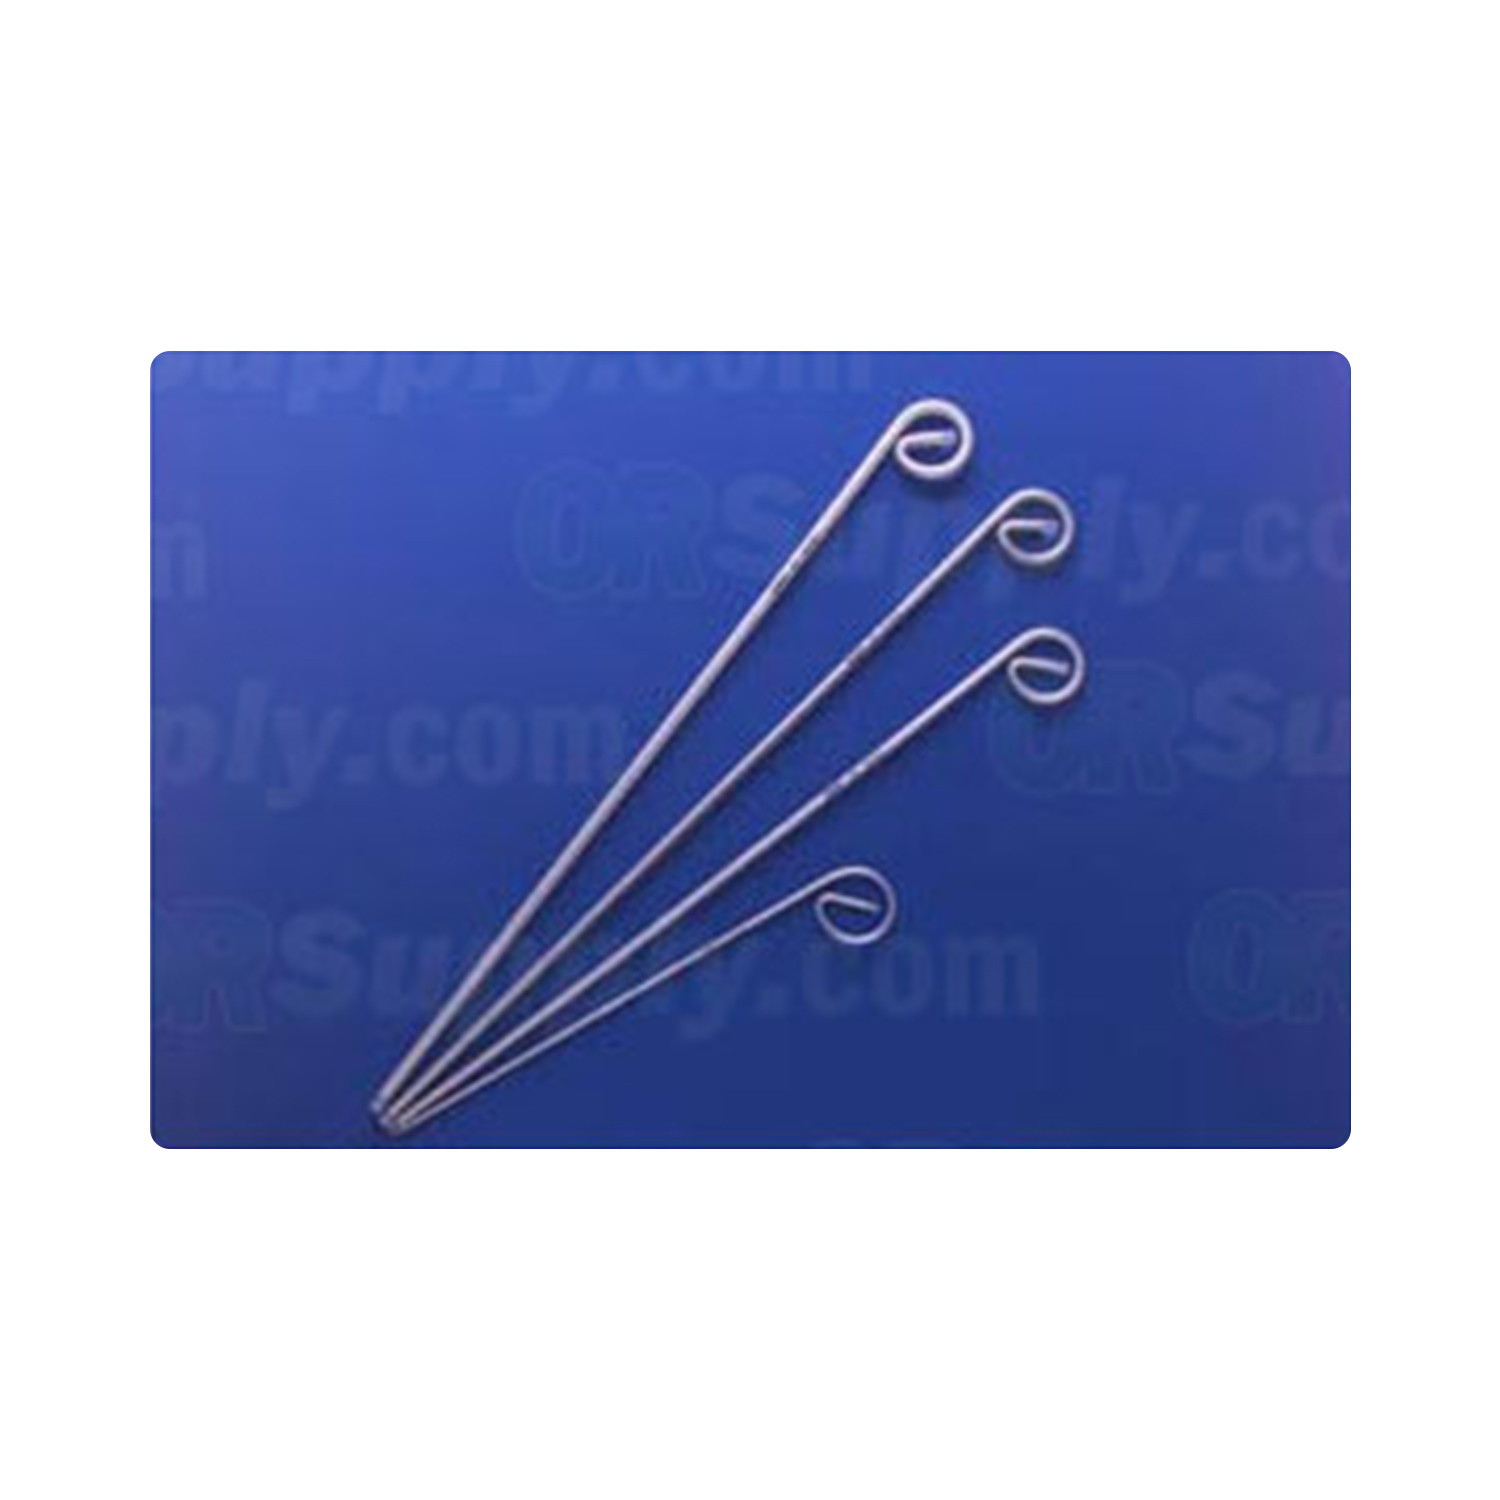 Rusch Flexi-Slip Plastic Coated Malleable Metal Endotracheal Stylets